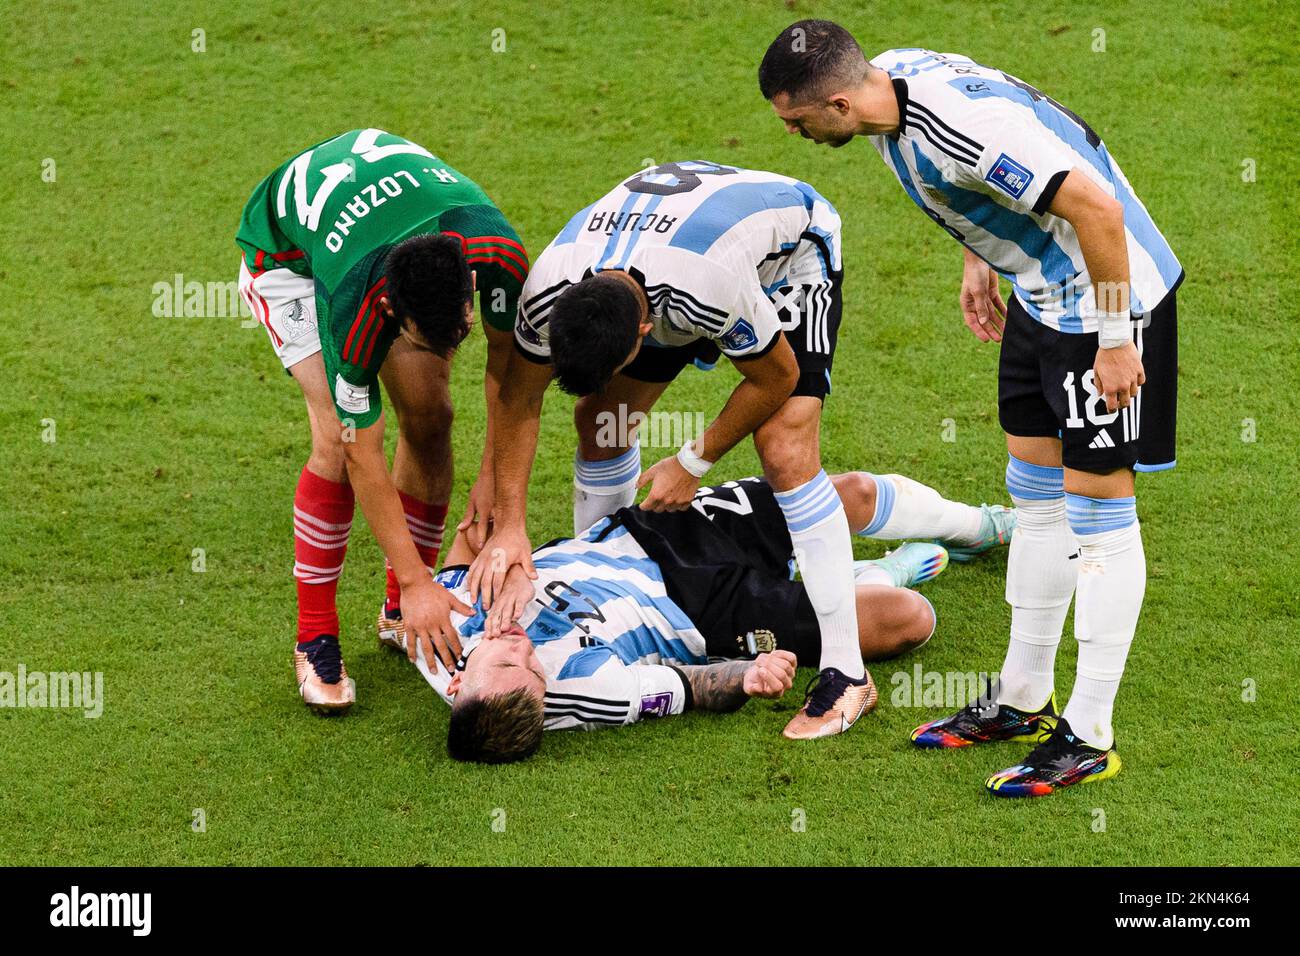 Argentina defender Lisandro Martinez kicked in the face by Mexico's Hirving  Lozano in heated World Cup match